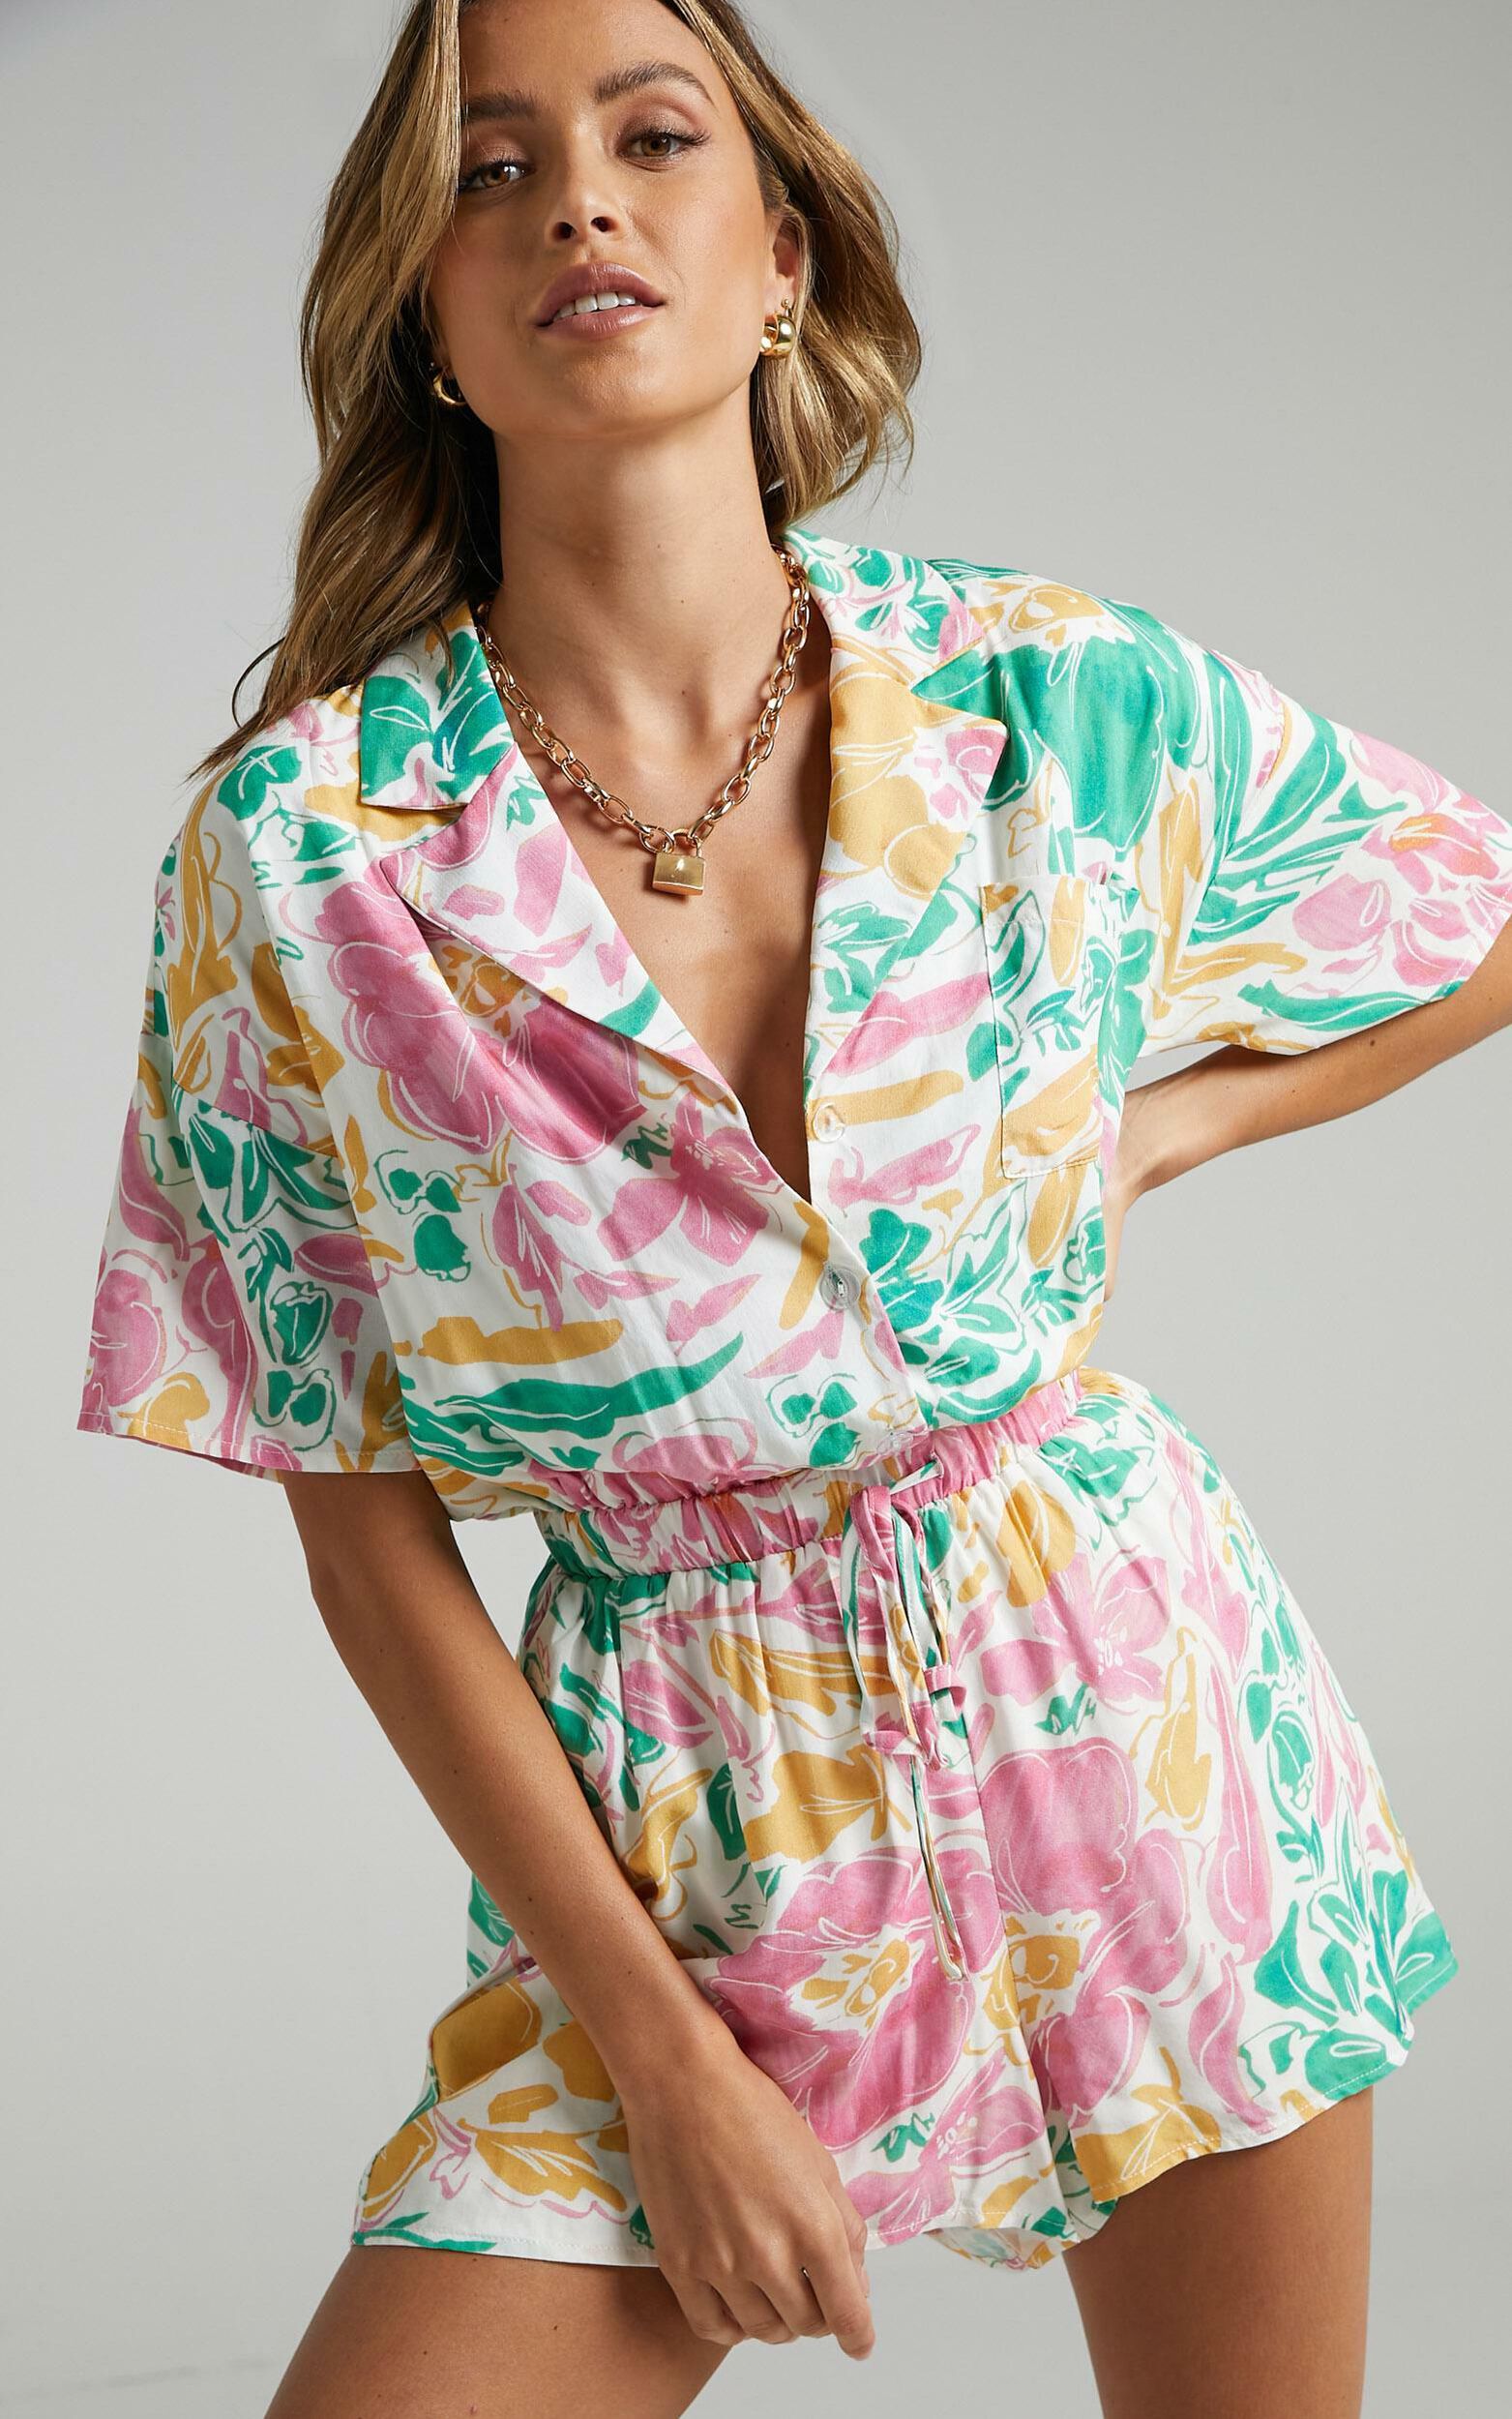 Calanthe Playsuit in Electric Floral | Showpo USA